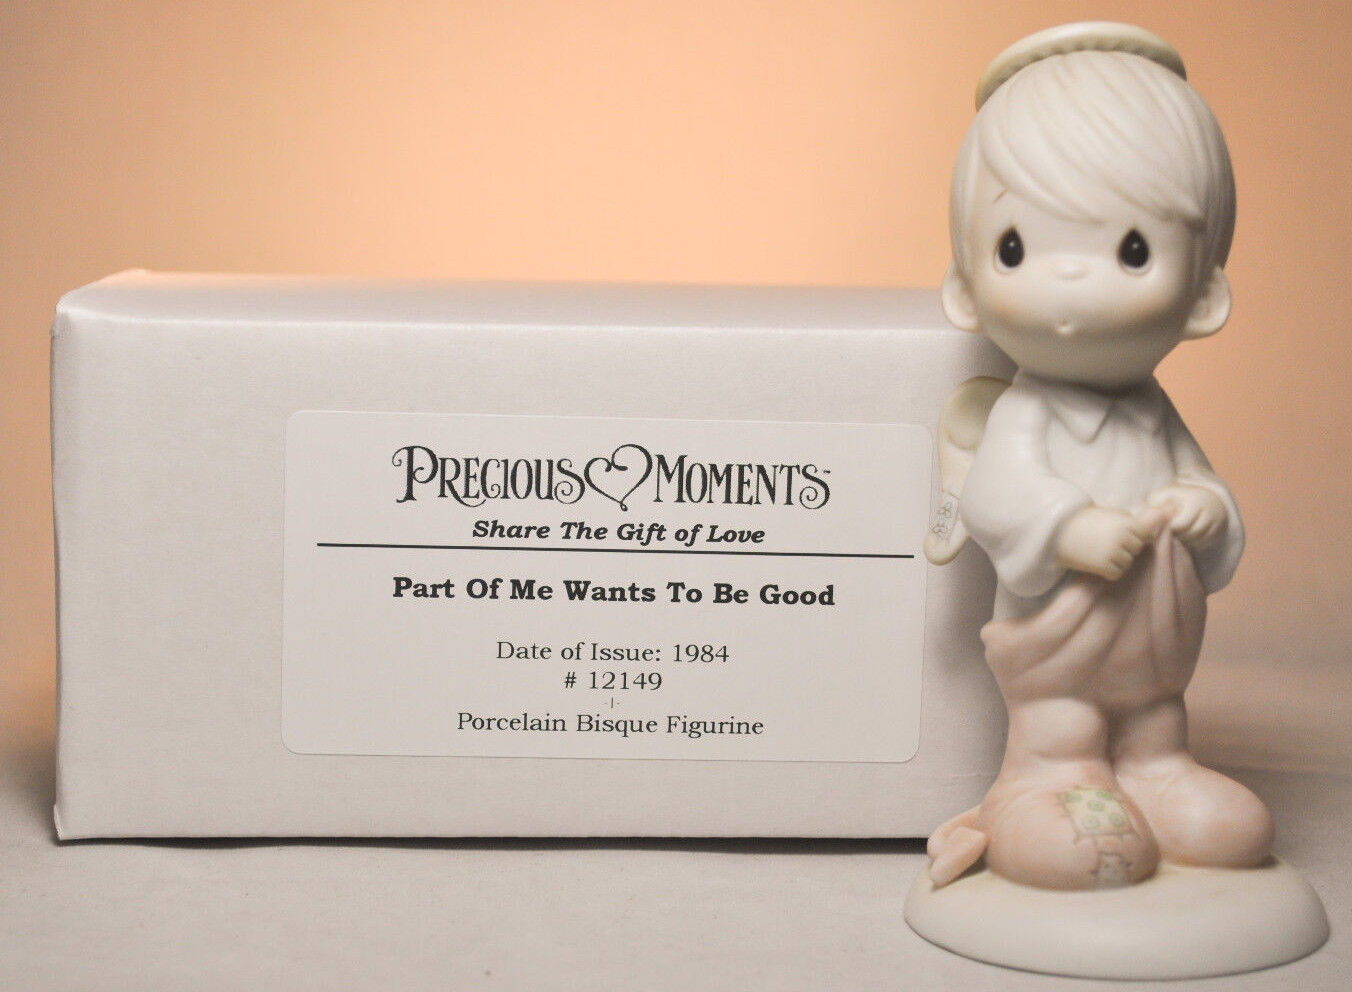 Precious Moments: Part Of Me Wants To Be Good - 12149 - Classic Figure